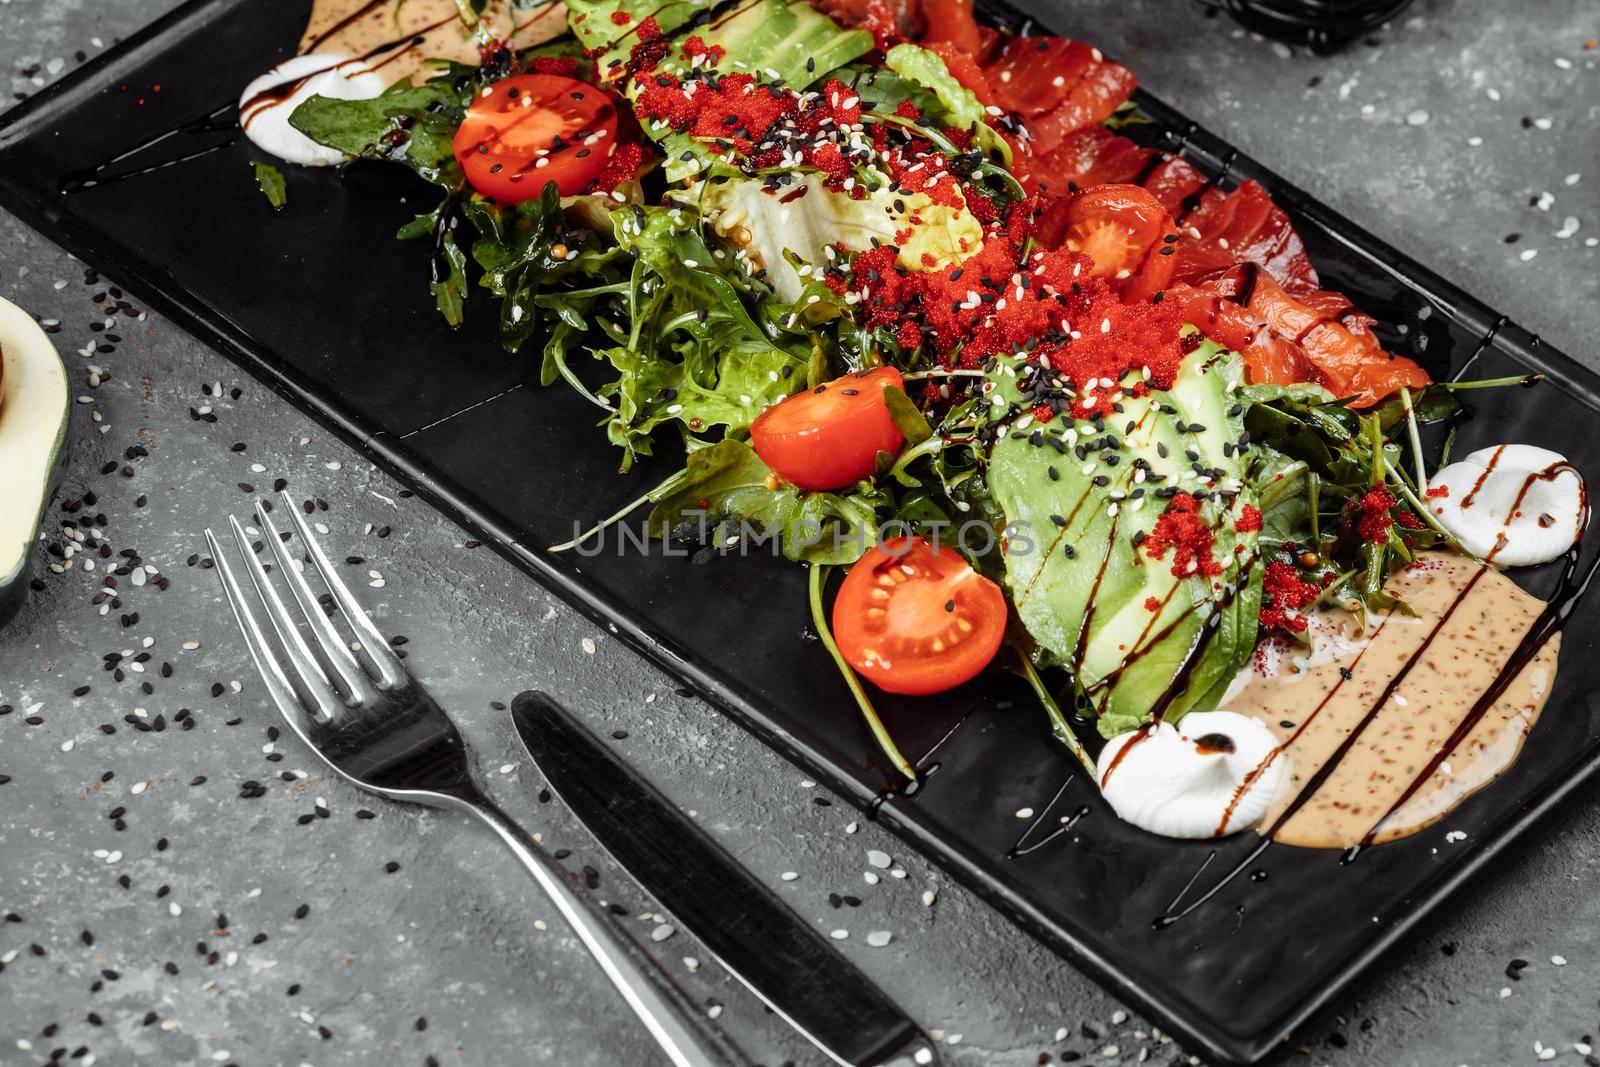 Salmon salad gravlax. Smoked salmon salad, with mixed greens, cherry tomatoes, avocado, black olives, carrots, sprouts, cucumber, and lime. Delicious healthy eating by UcheaD